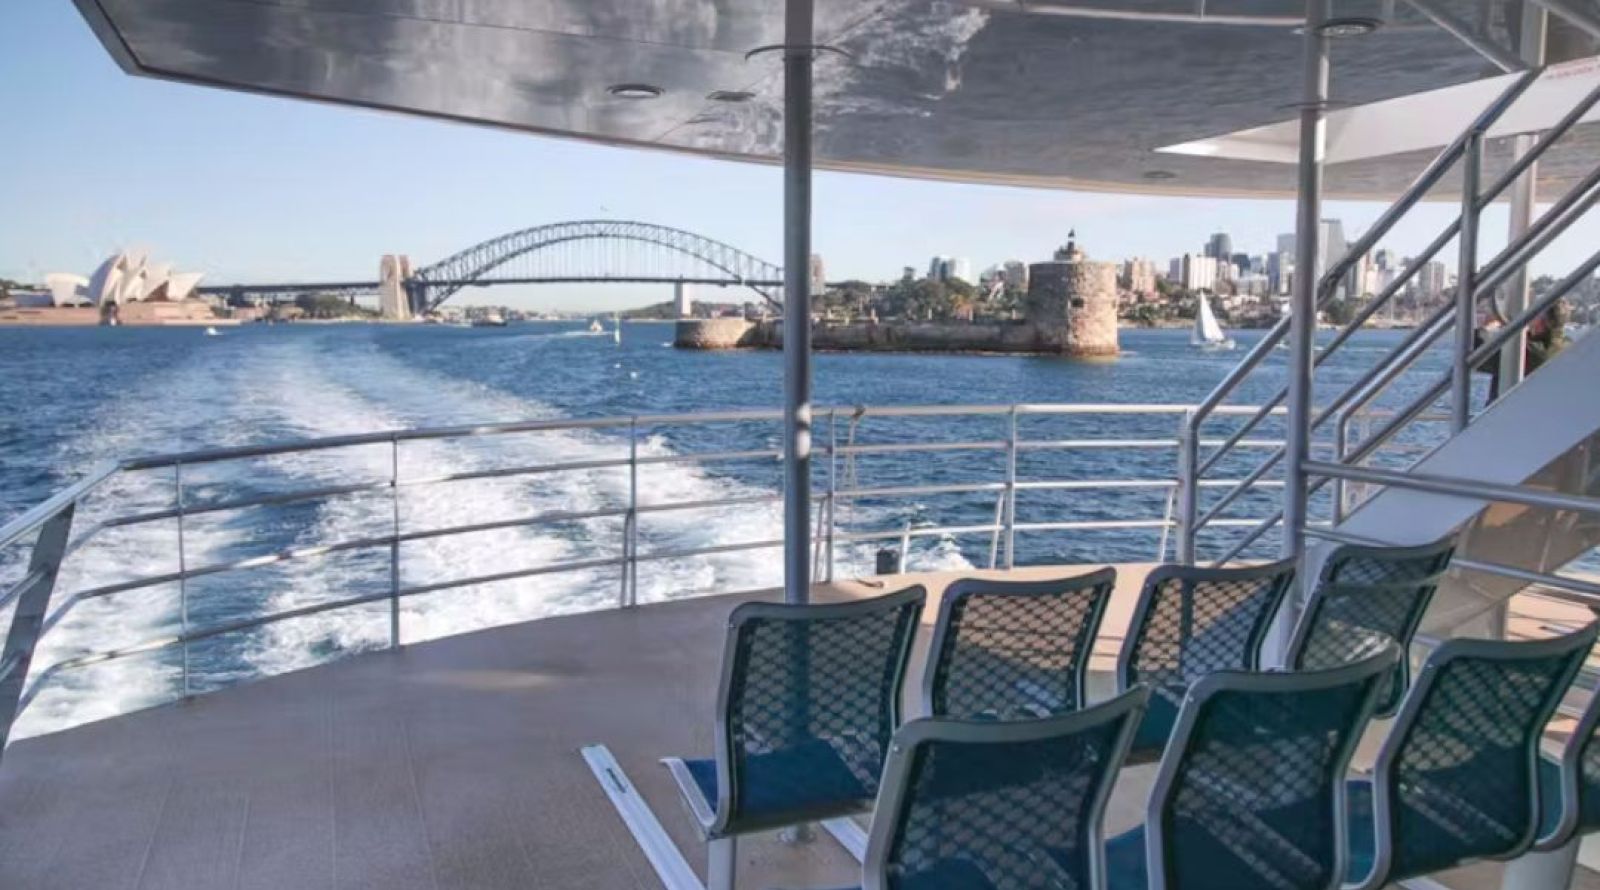 Catalina - NYE outdoor viewing space on Sydney Harbour Cruise